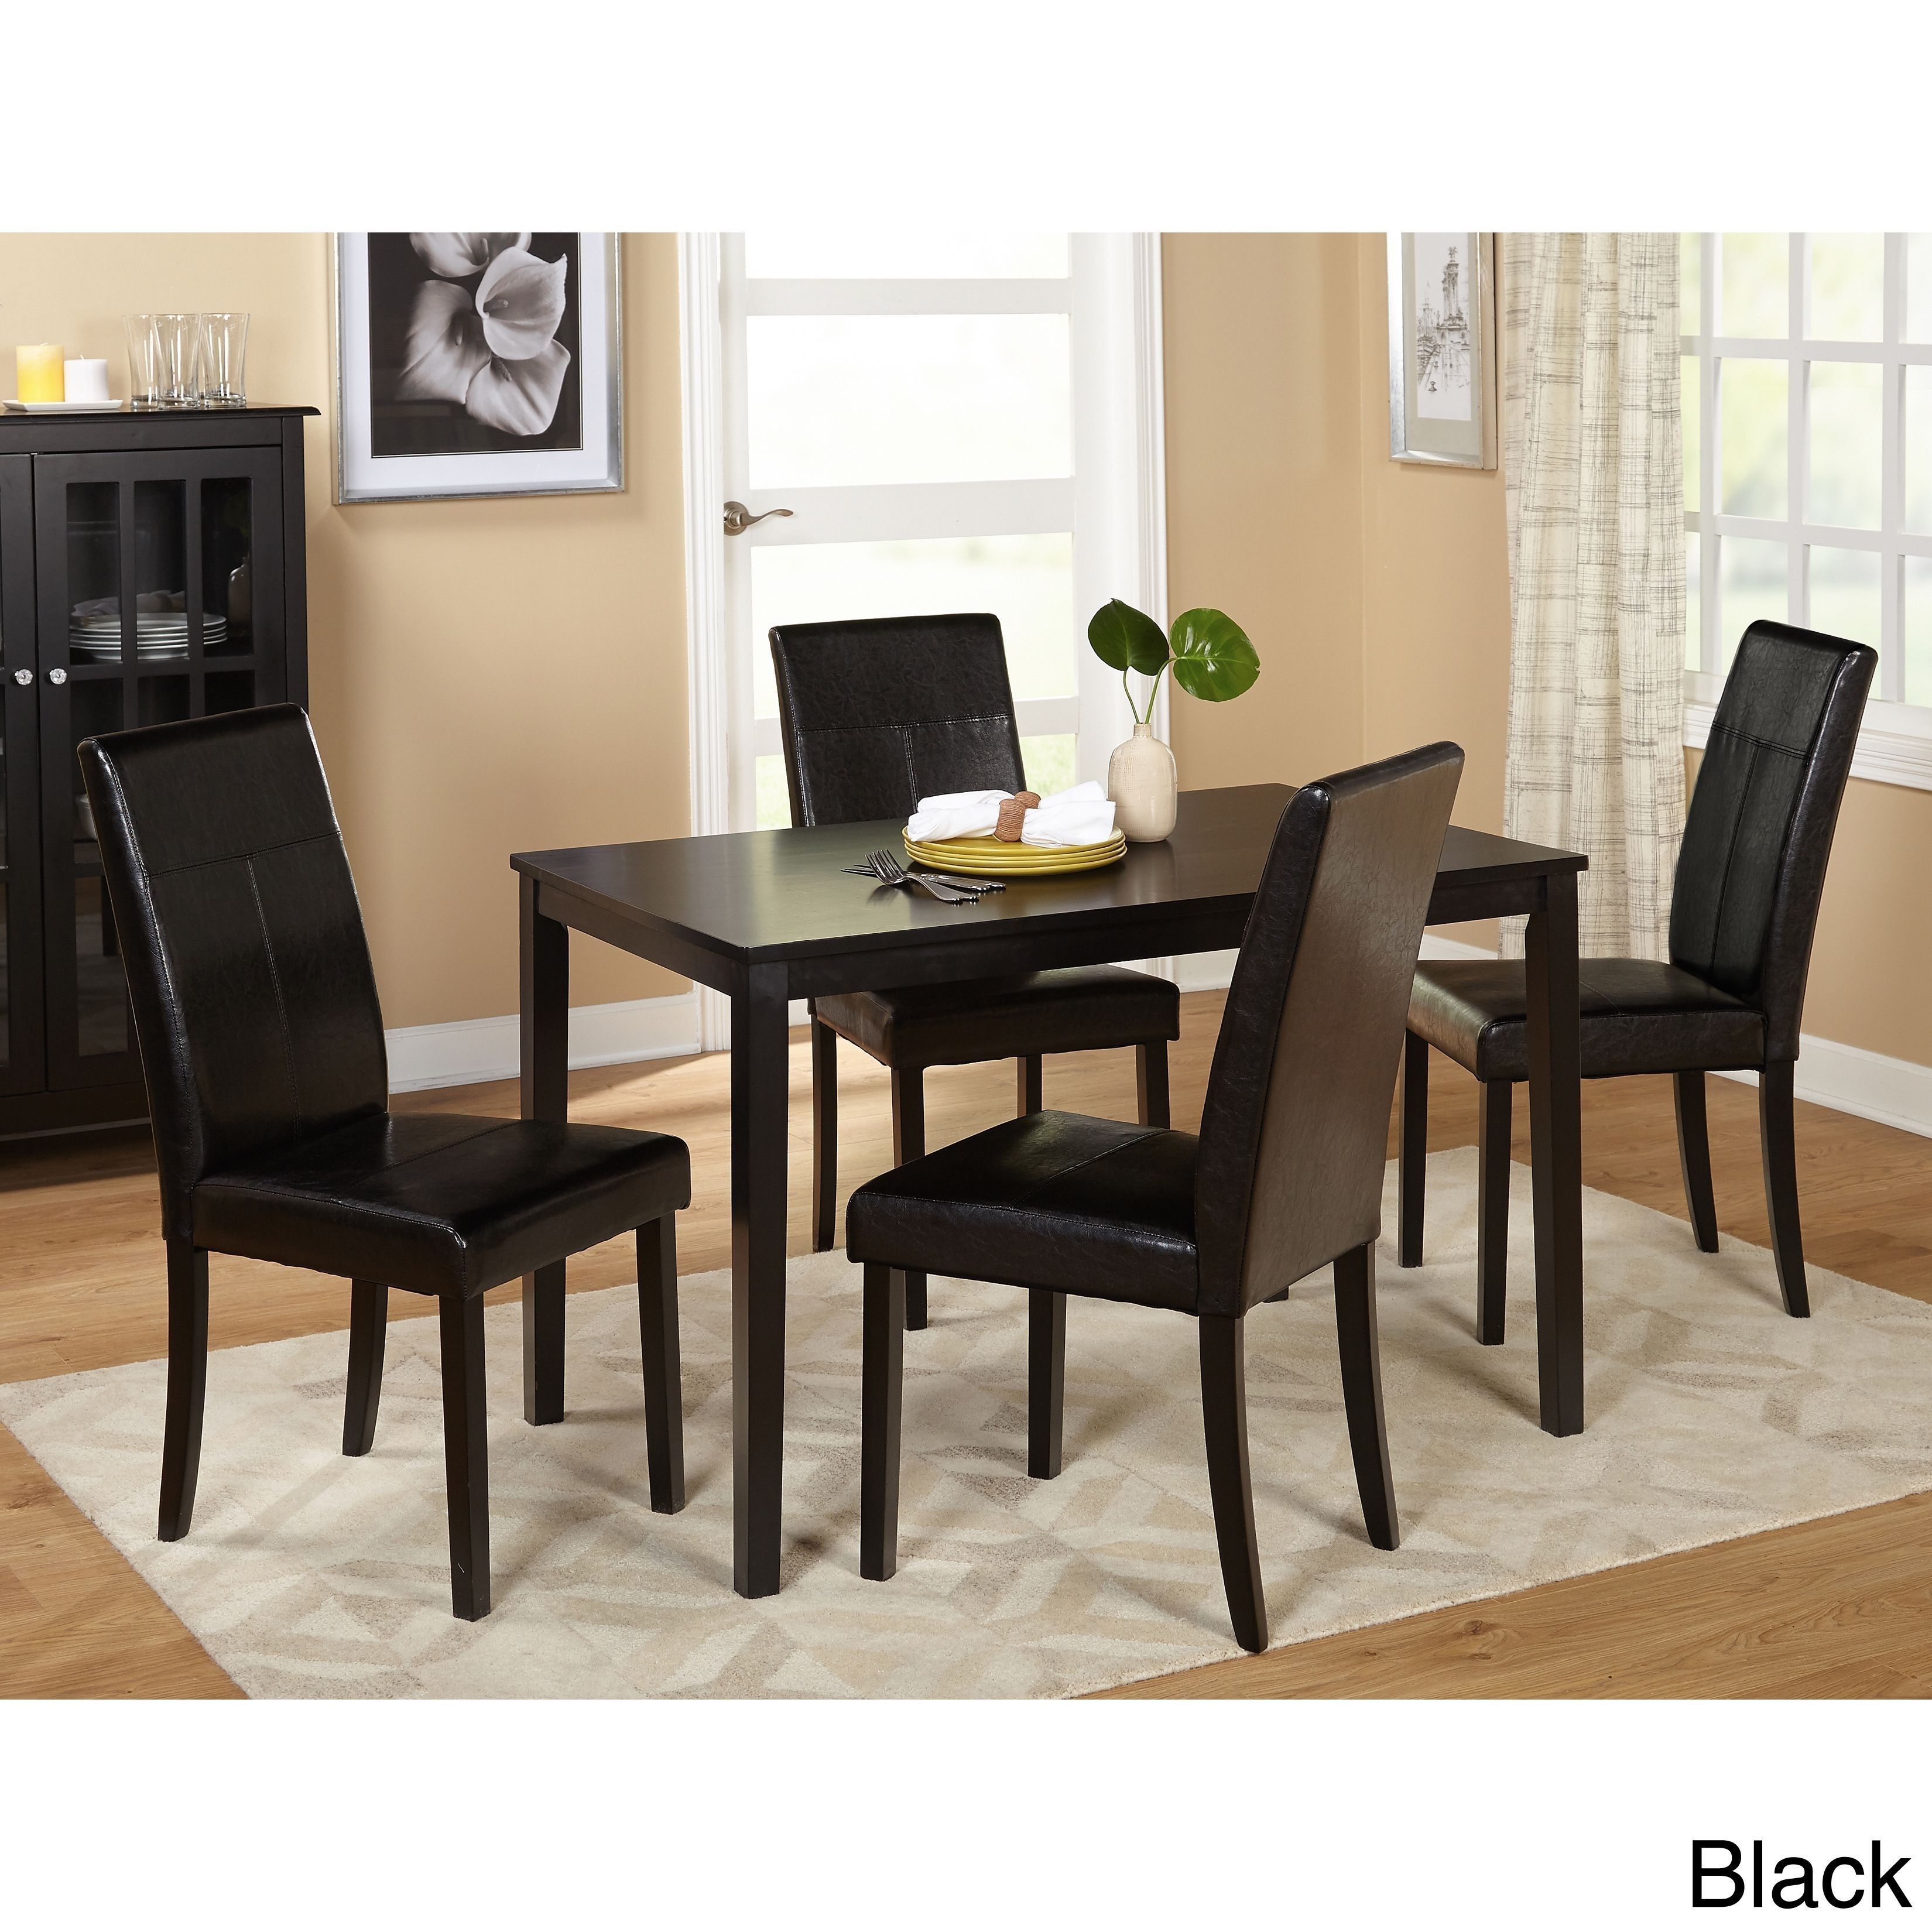 Toby 7 Piece Dining Setorren Ellis Reviews Throughout Most Popular Helms 6 Piece Rectangle Dining Sets With Side Chairs (View 12 of 20)